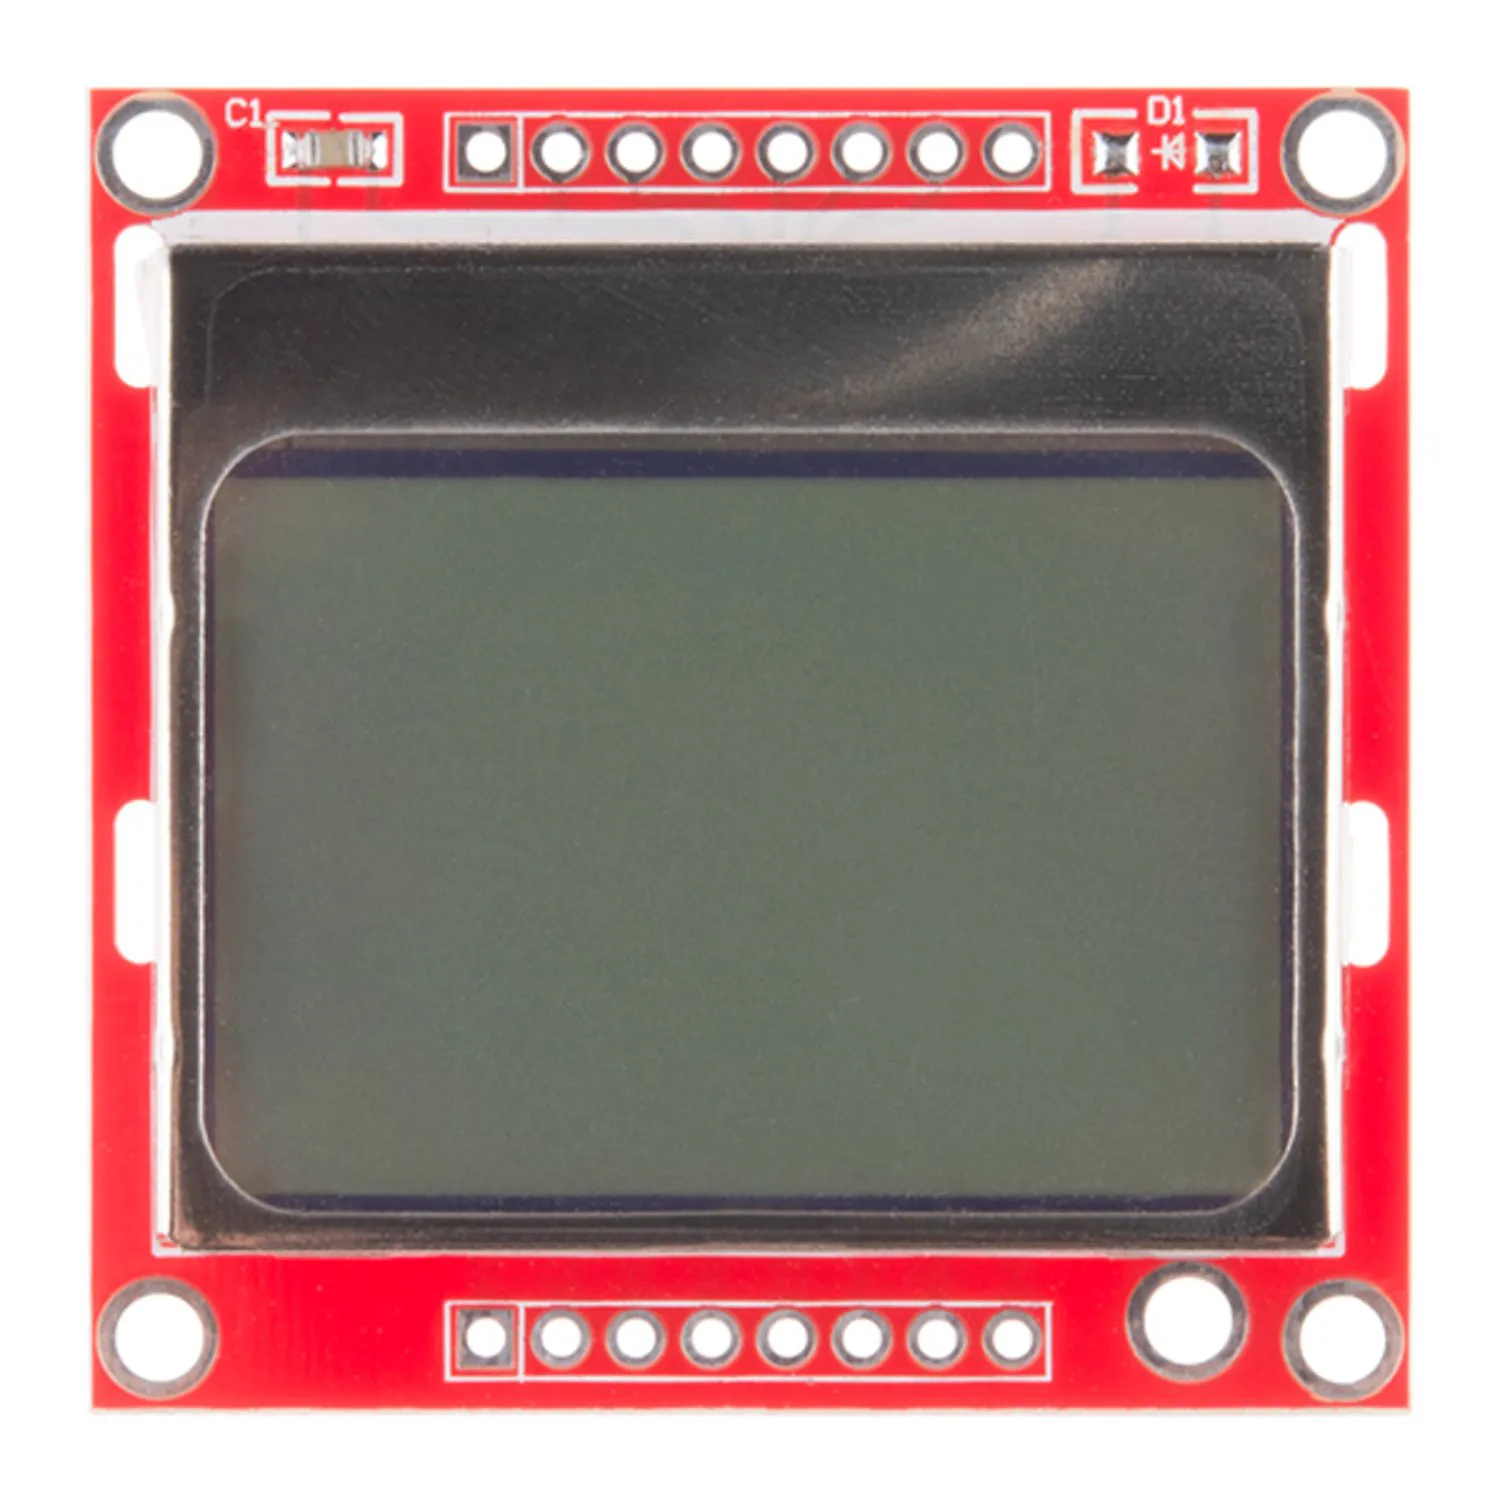 Photo of Graphic LCD 84x48 - Nokia 5110